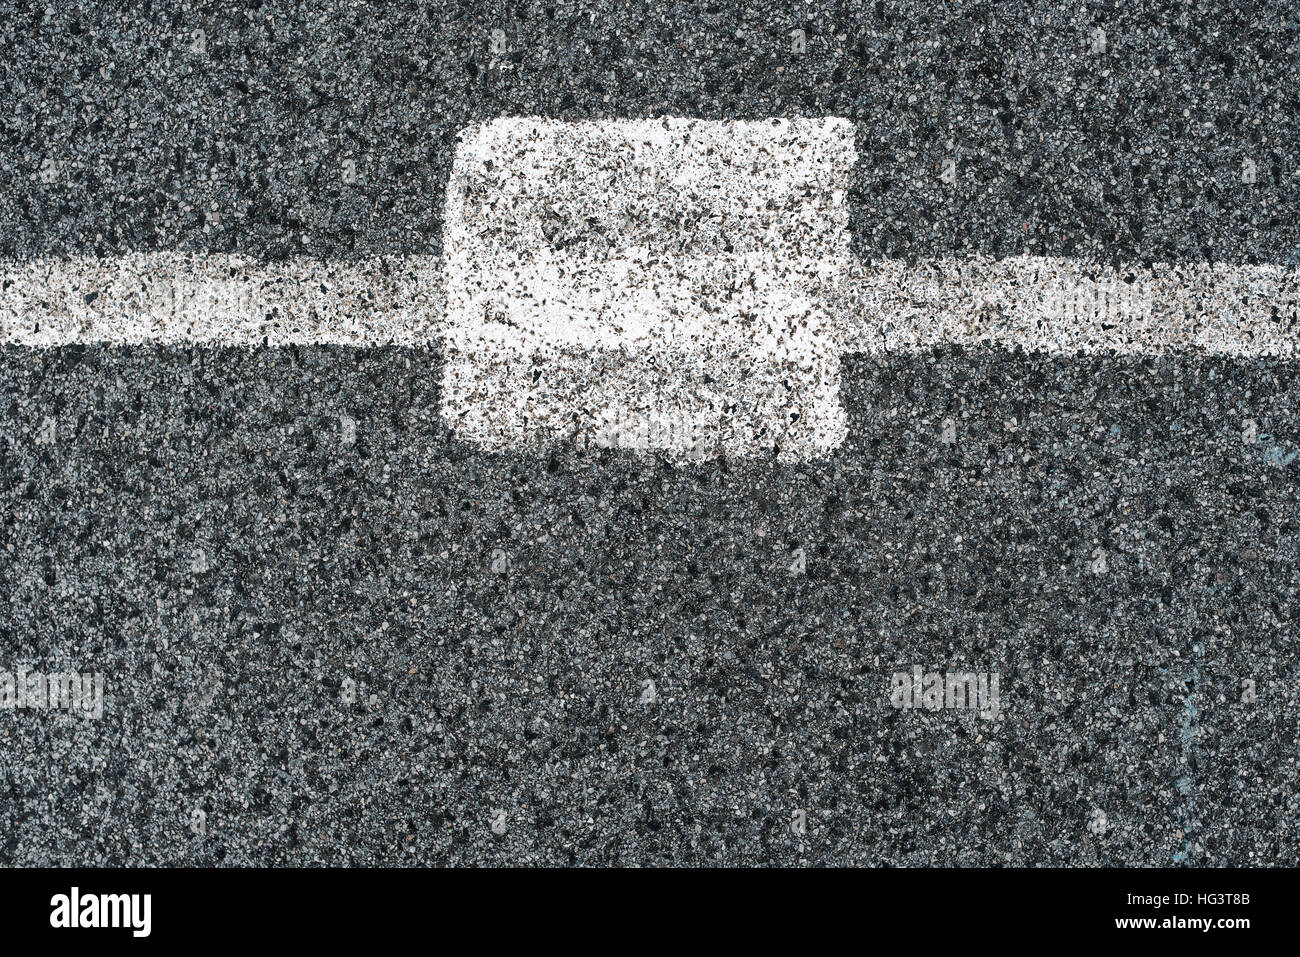 White line and asphalt road as simple background pattern, urban surface texture to be used for minimalistic design element Stock Photo